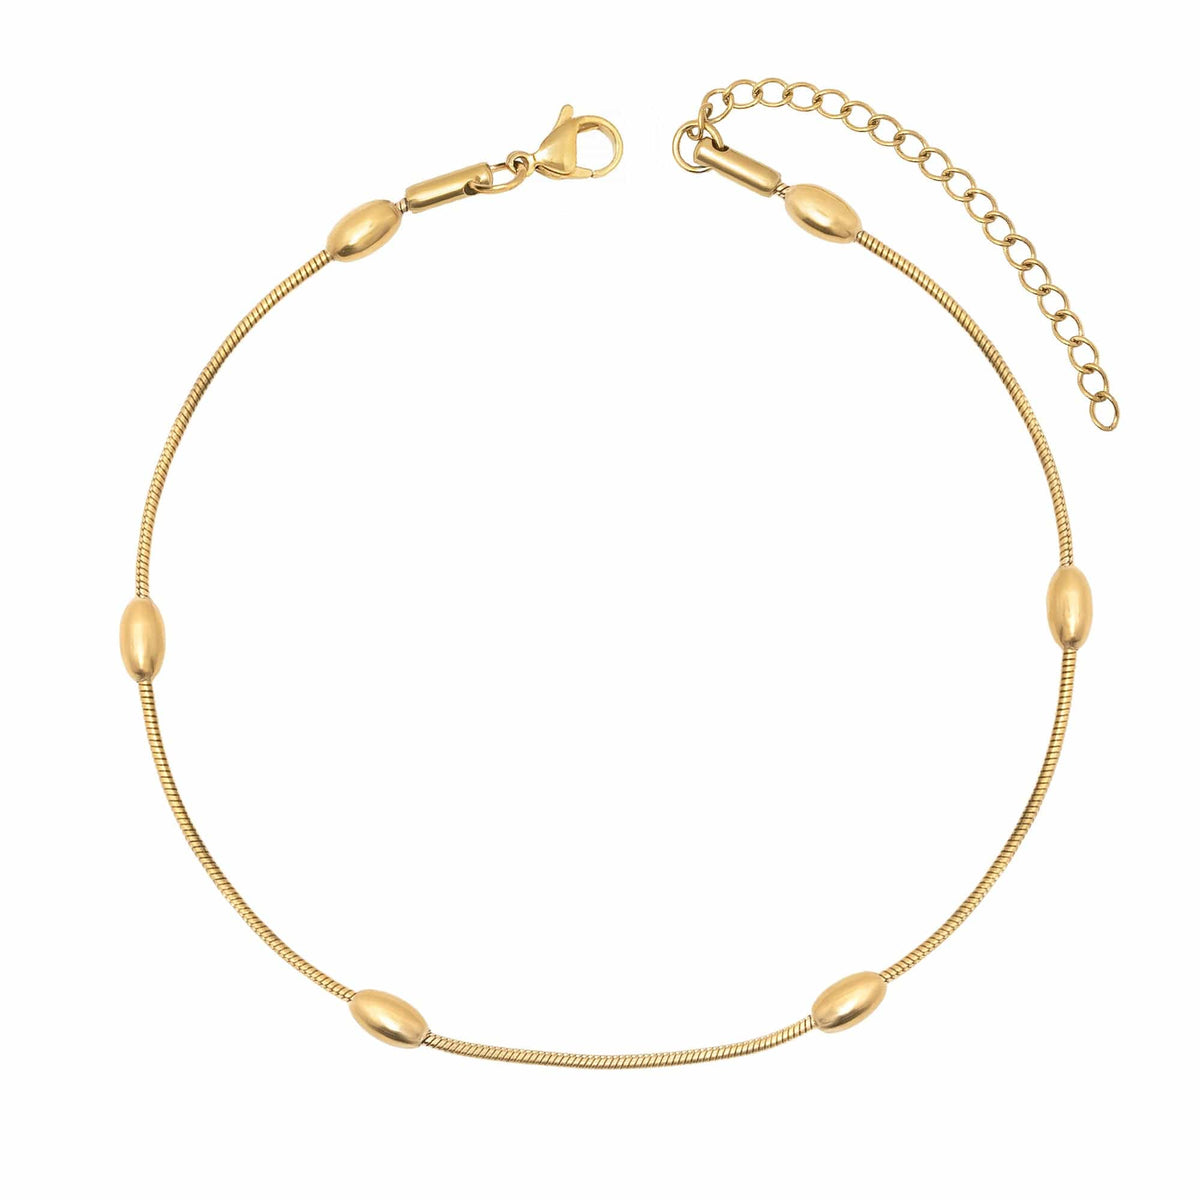 BohoMoon Stainless Steel Cara Anklet Gold